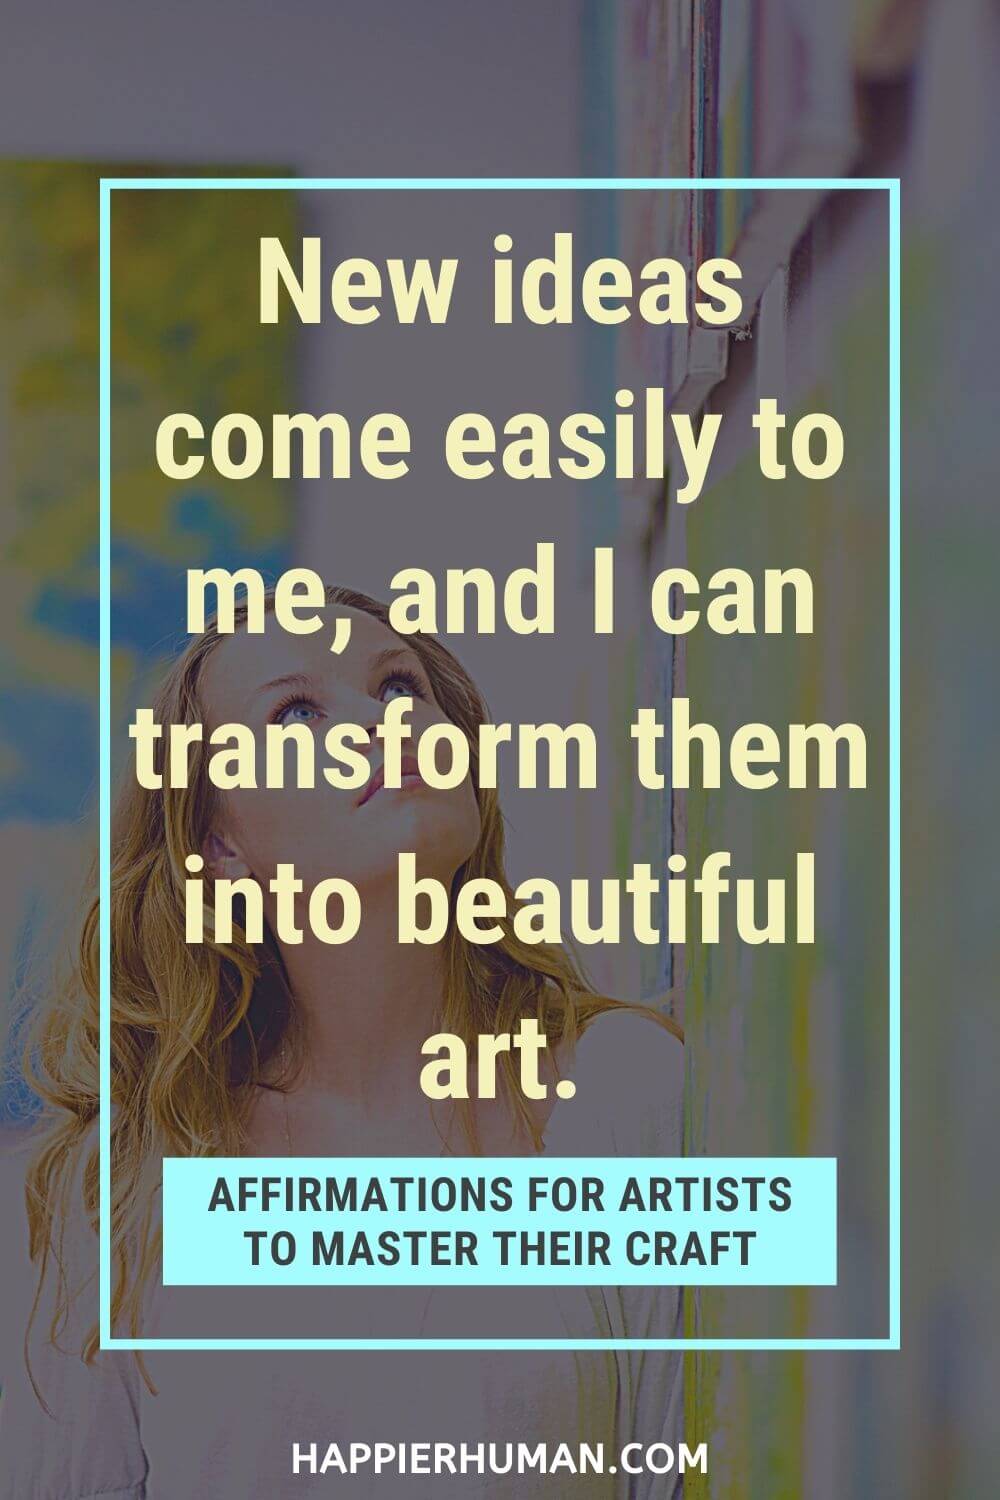 Affirmations for Artists - New ideas come easily to me, and I can transform them into beautiful art. | affirmations for imagination | affirmations for designers | talent affirmations